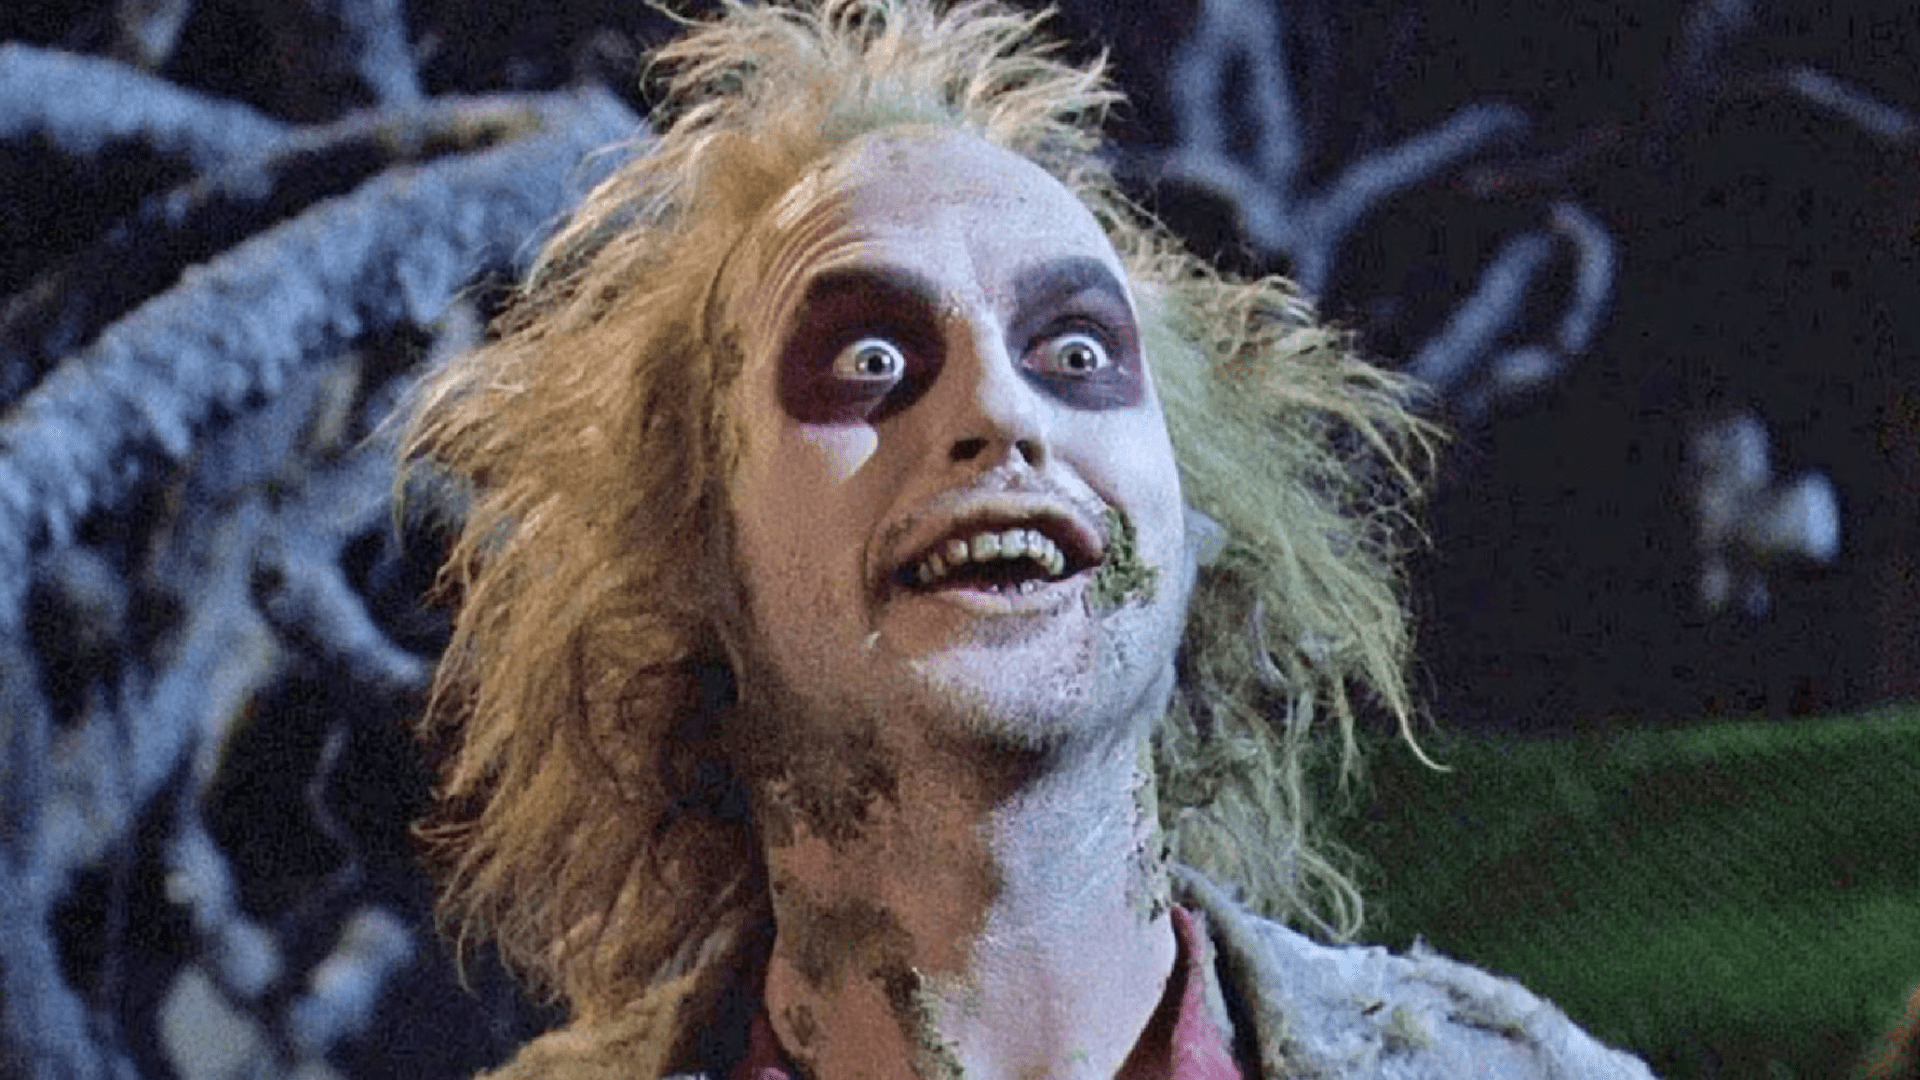 Beetlejuice (1988) Quotes - Beetlejuice (1988) Quotes From Tim Burton's Classic Film